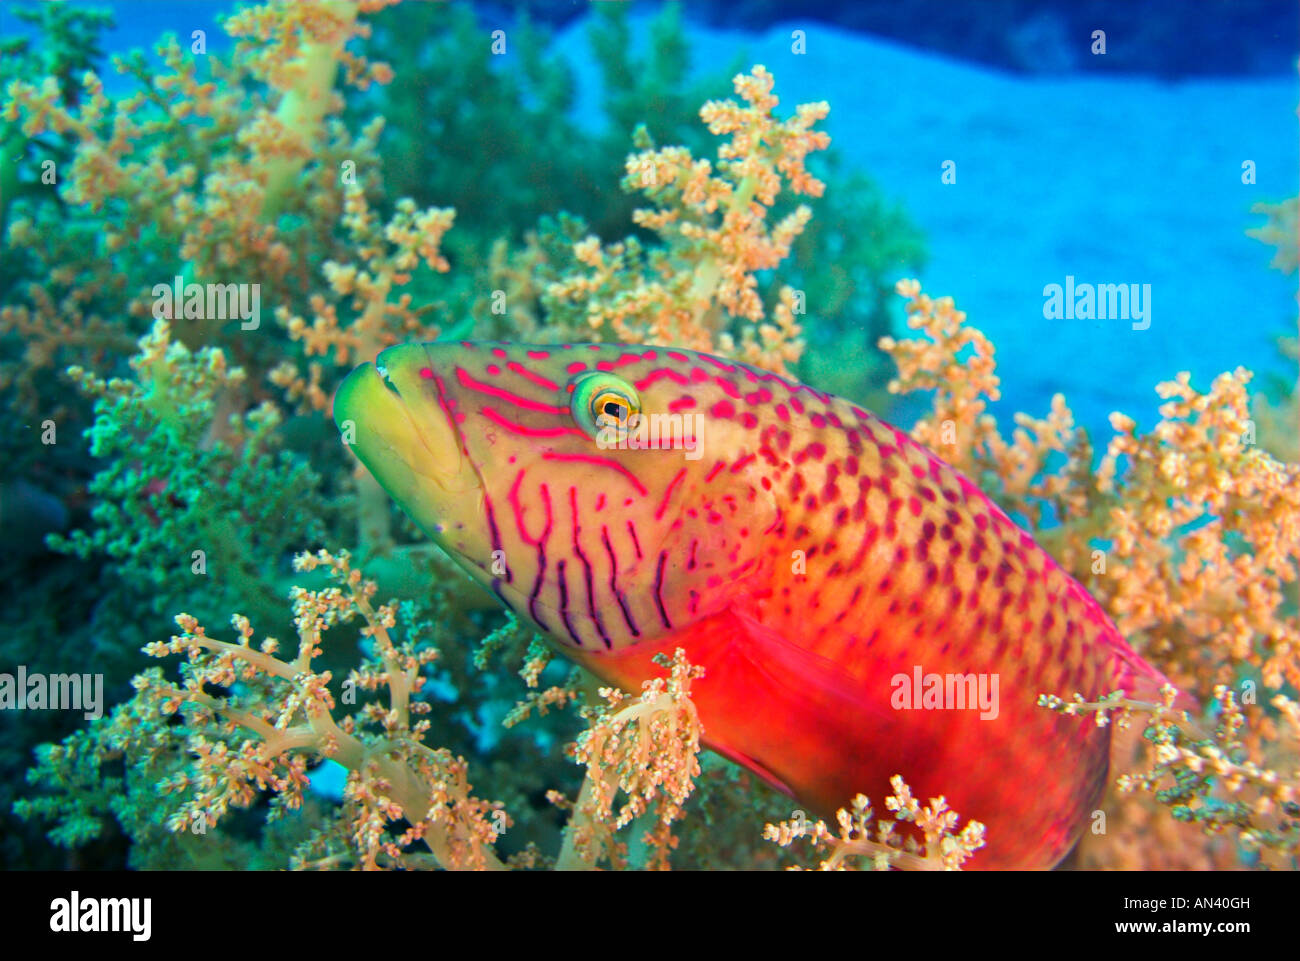 'Cheeklined wrasse' Oxycheilinus digramma fish in 'broccoli soft coral' Red Sea Stock Photo